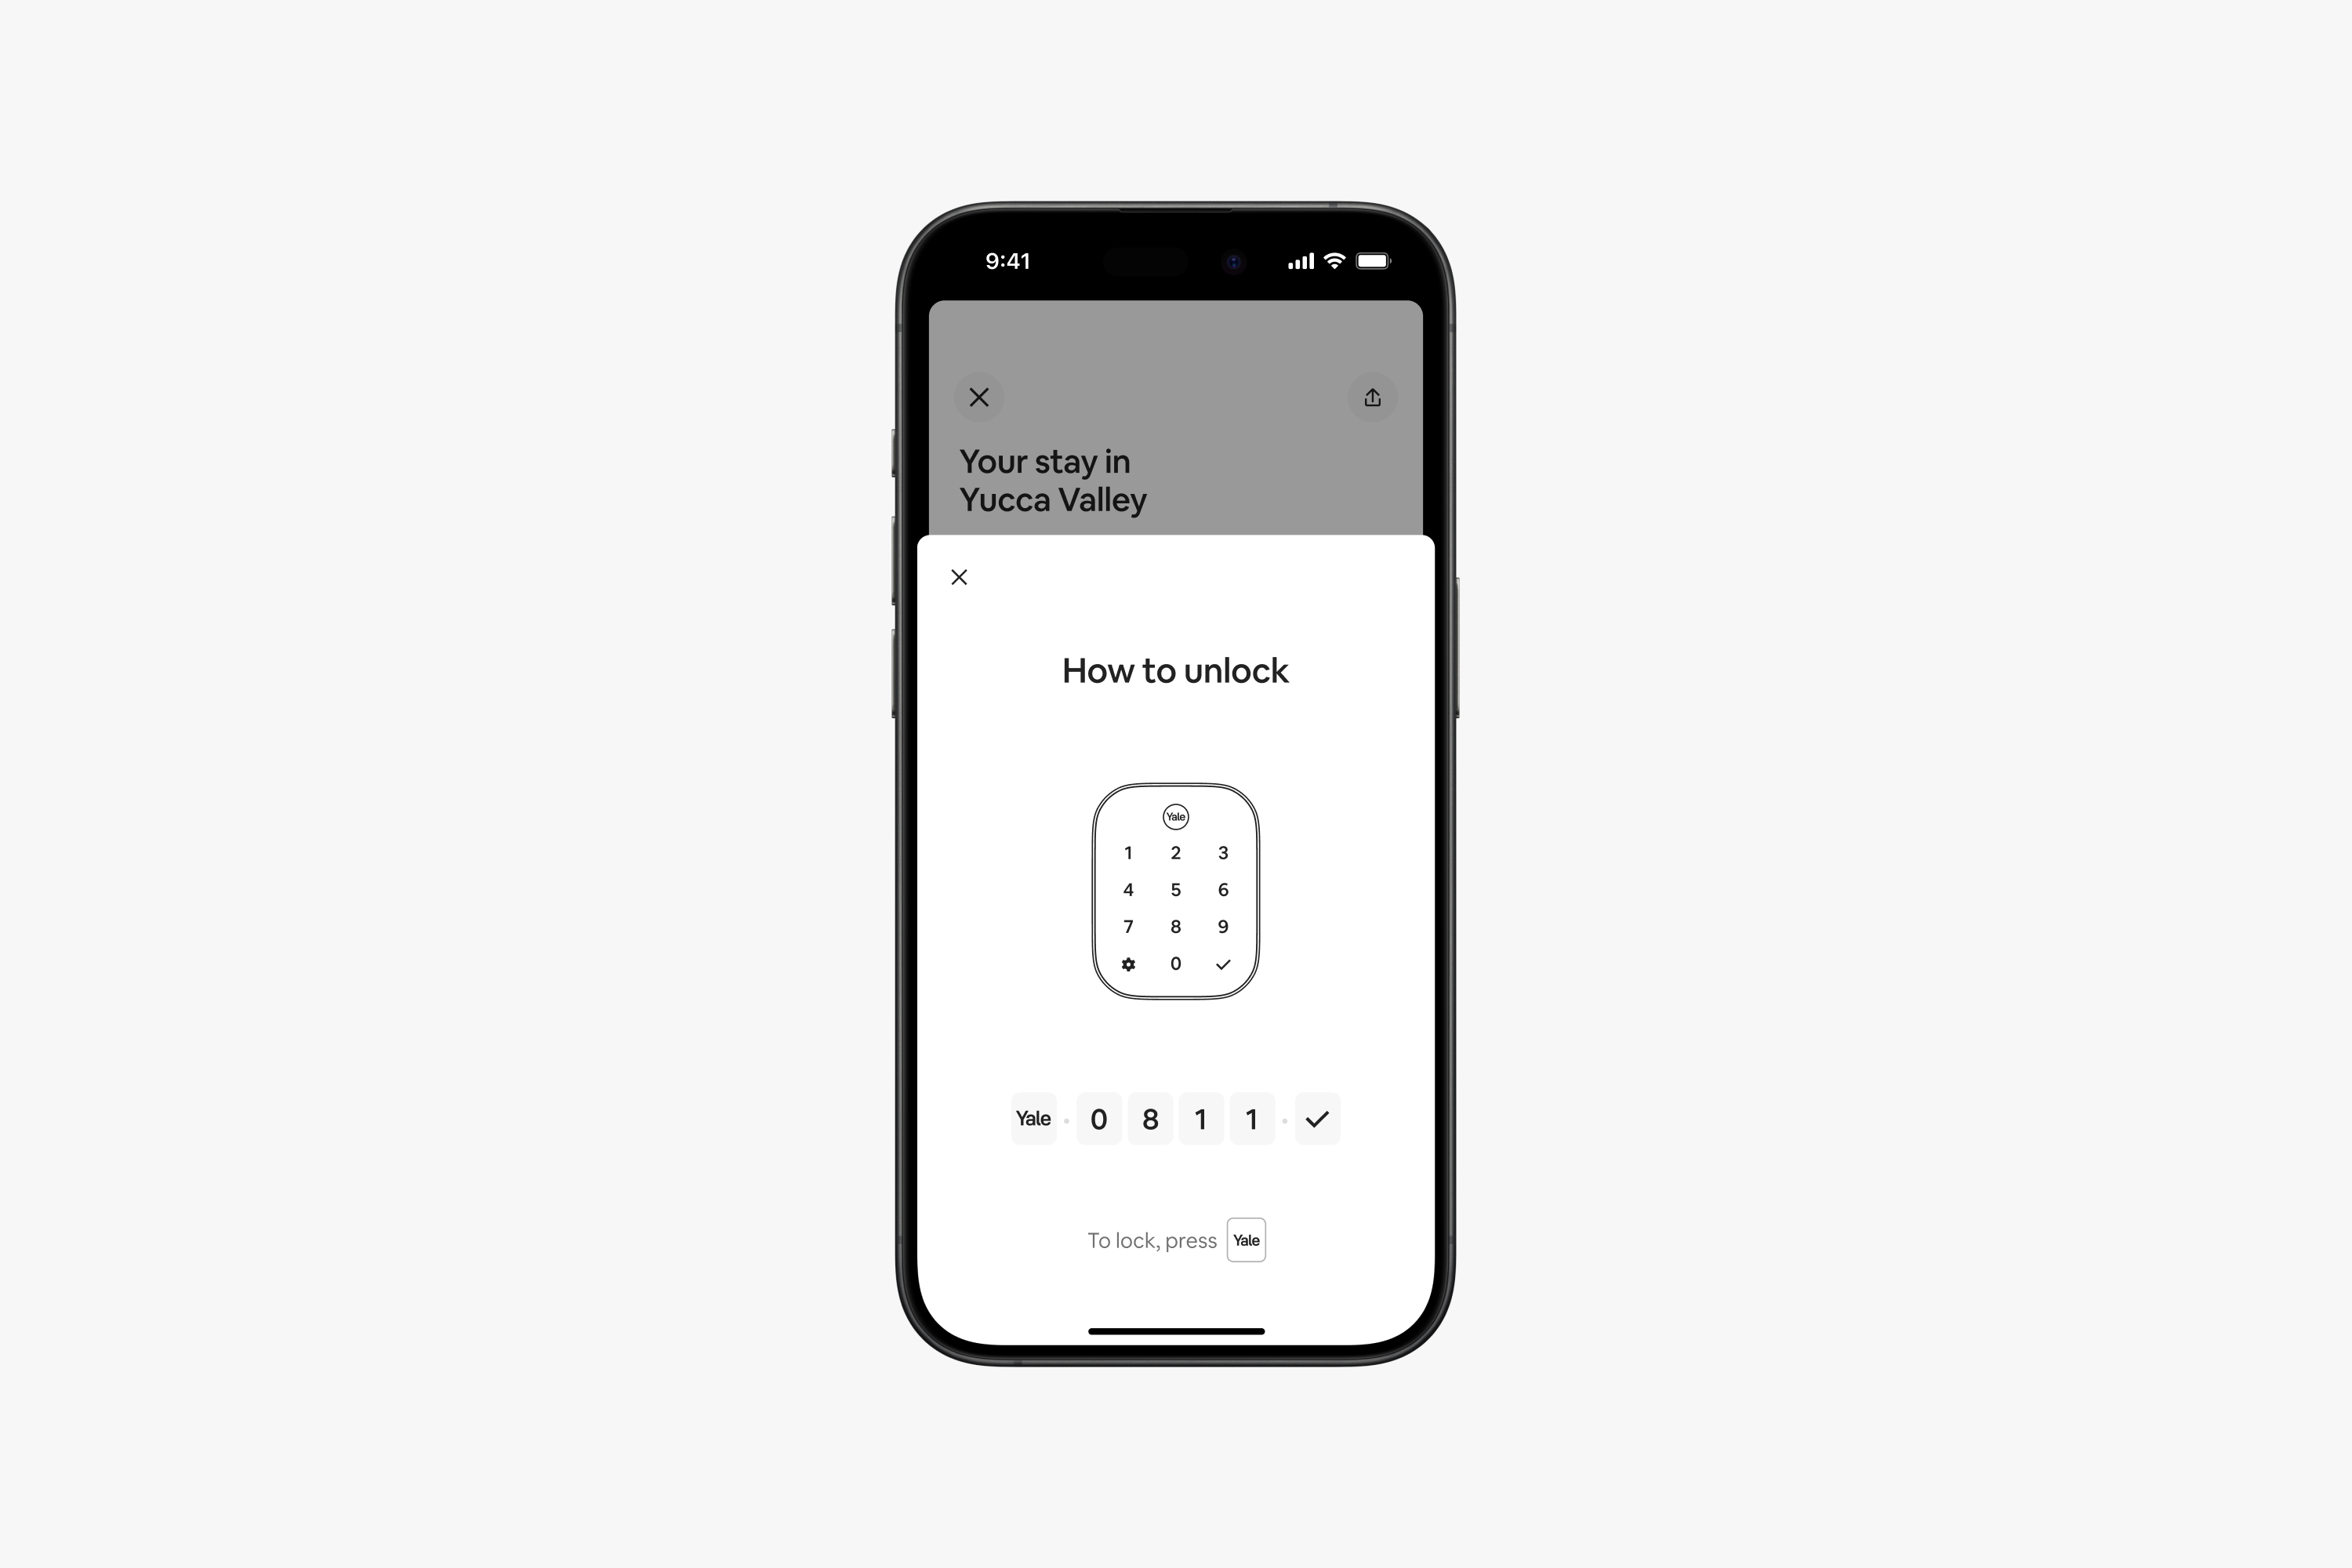 Phone screen displaying how to unlock a Yale smart lock.